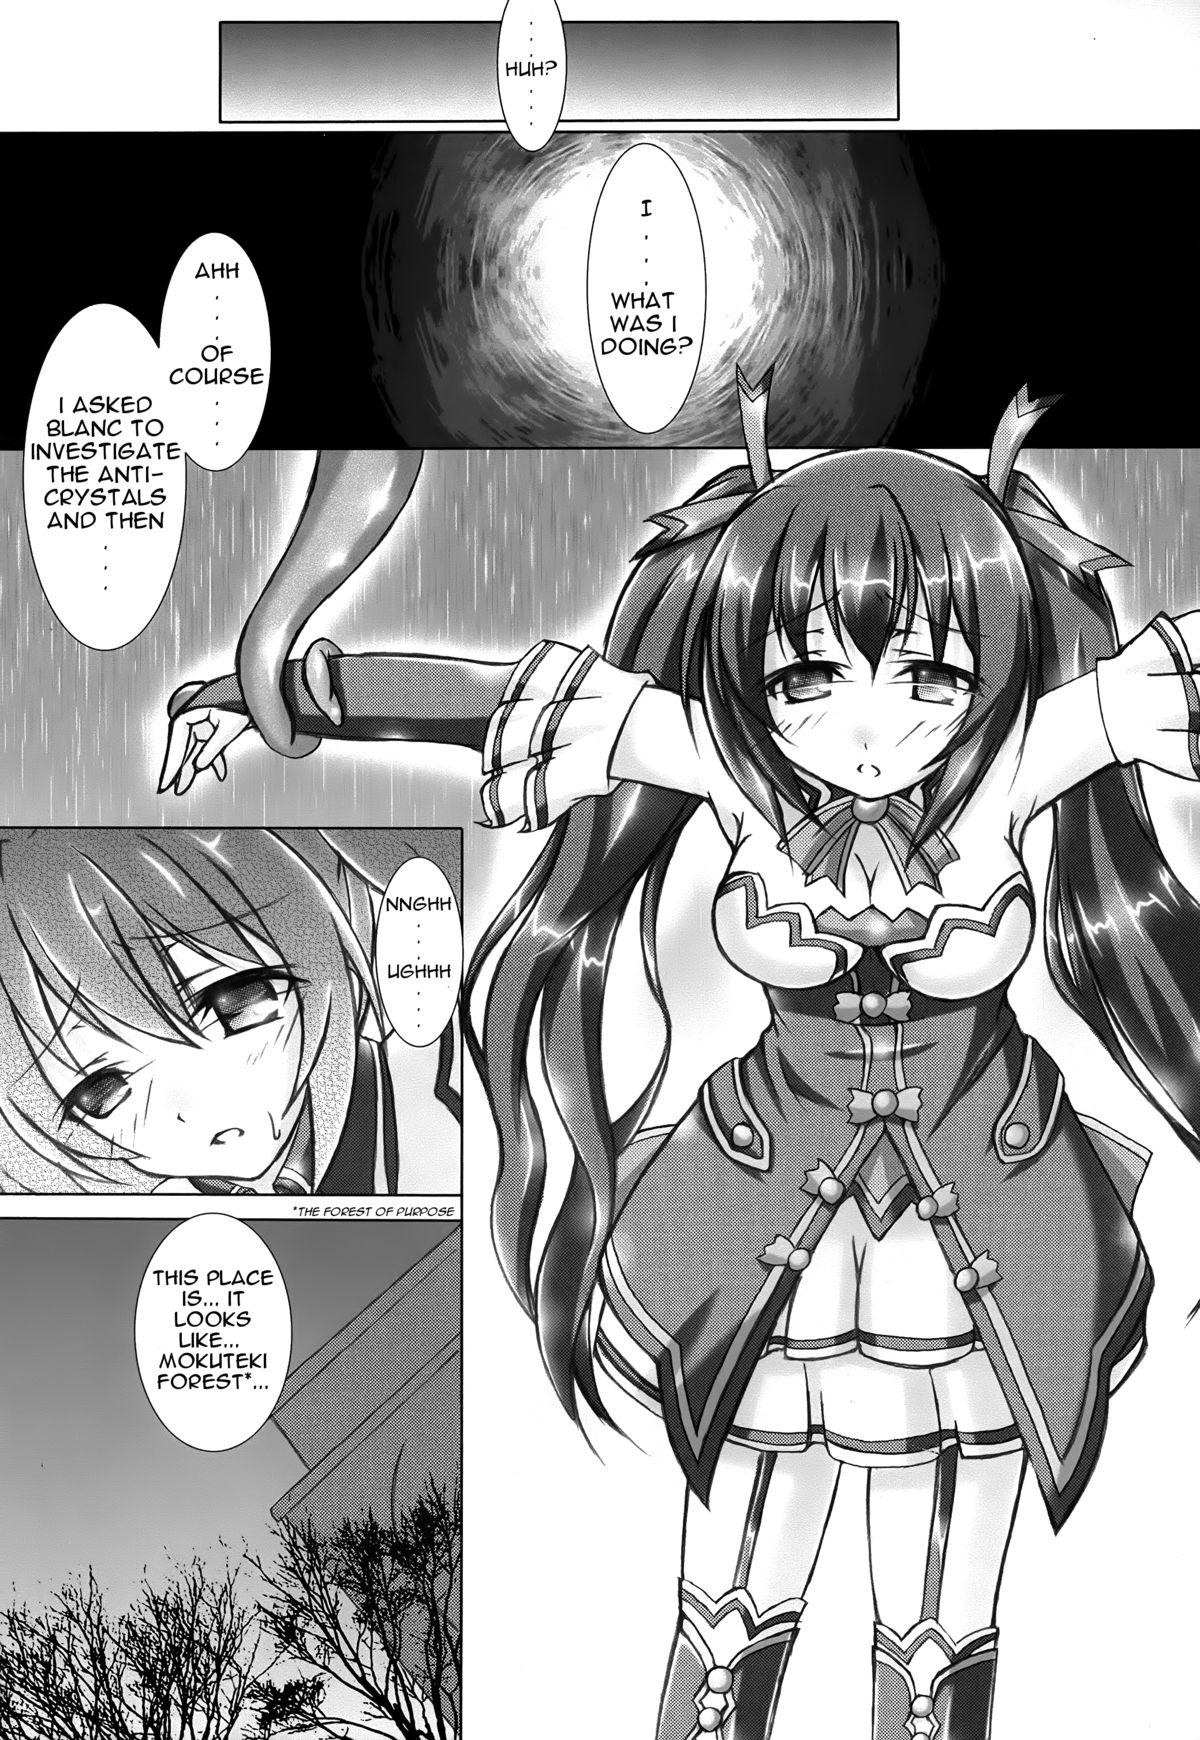 Prostitute Tentacle Syndrome 2 - Hyperdimension neptunia Screaming - Page 4